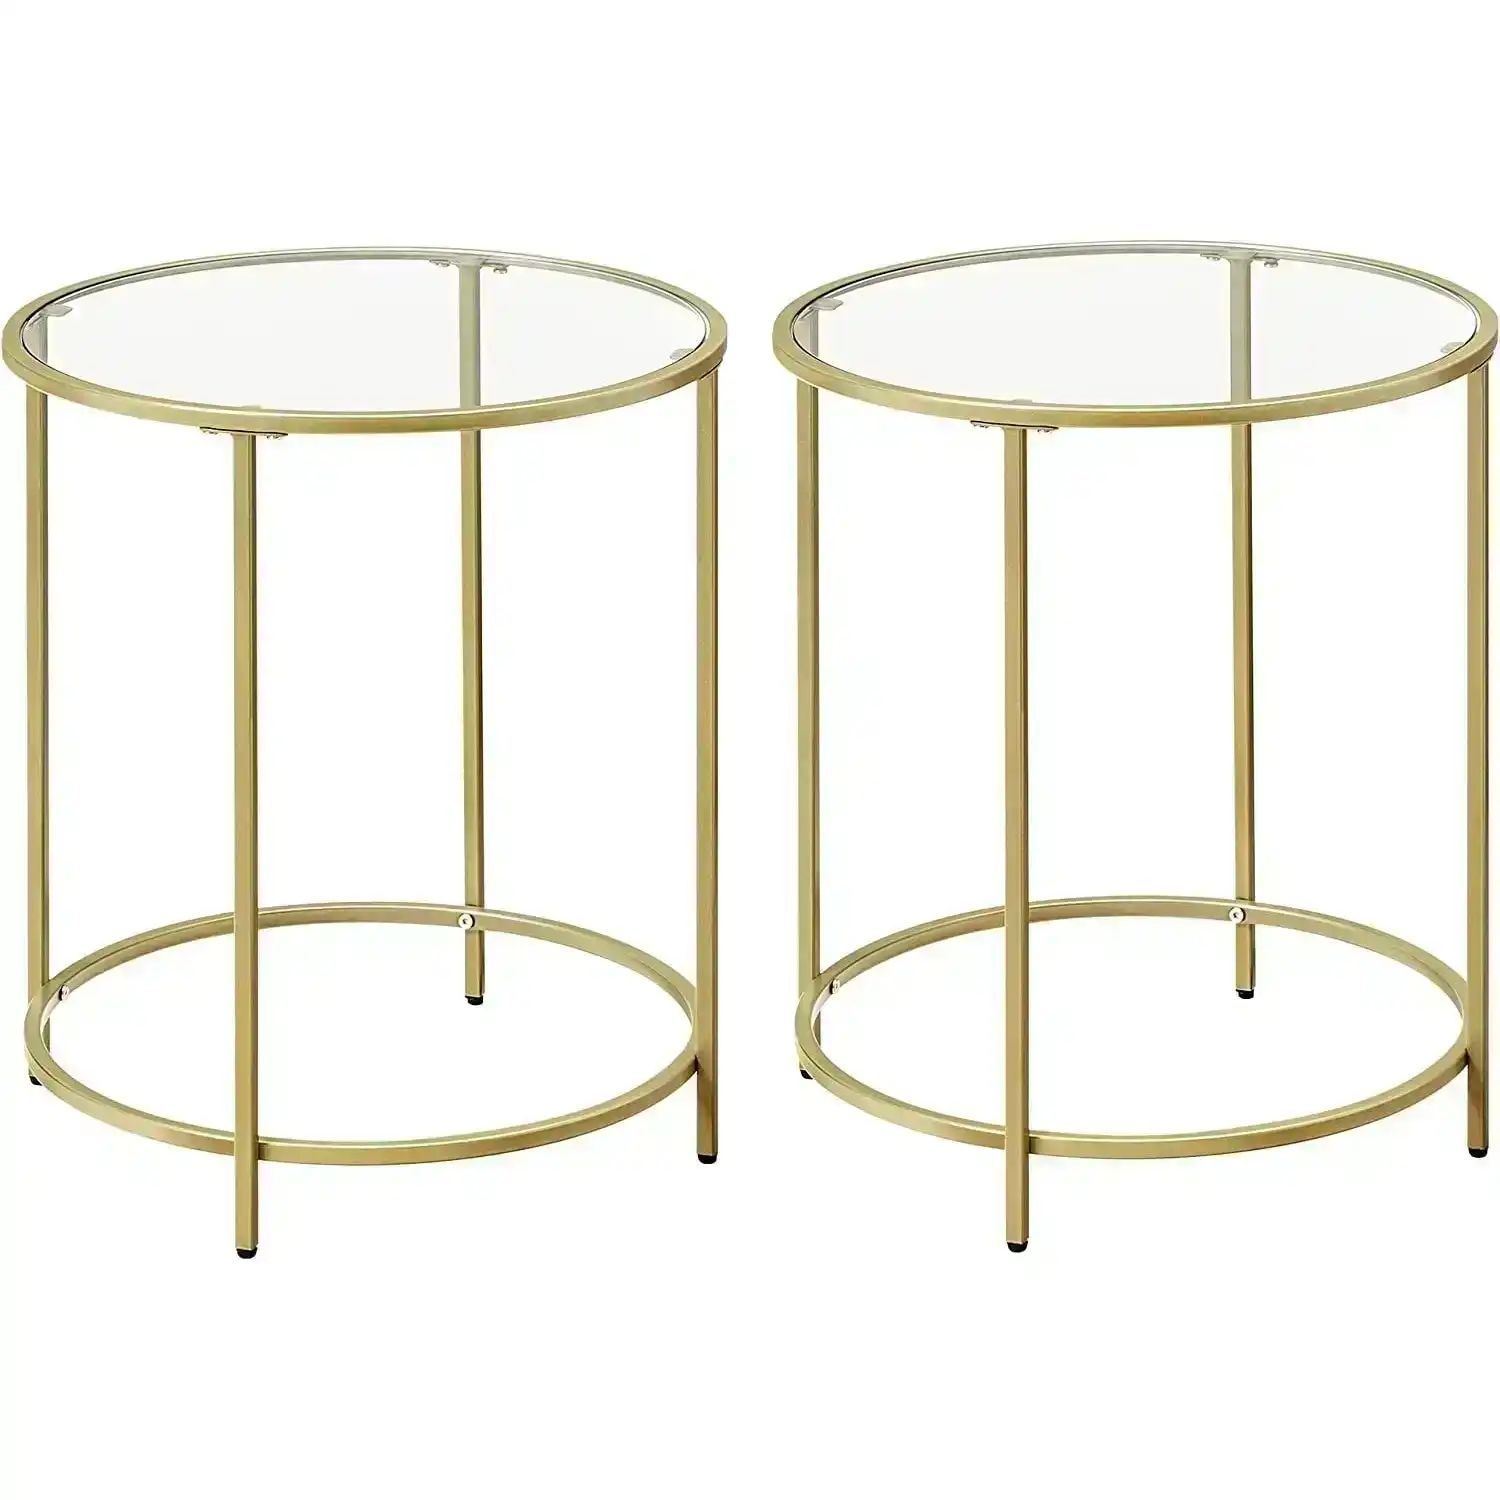 VASAGLE Round Side Tables Set of 2 Tempered Glass with Steel Frame Gold